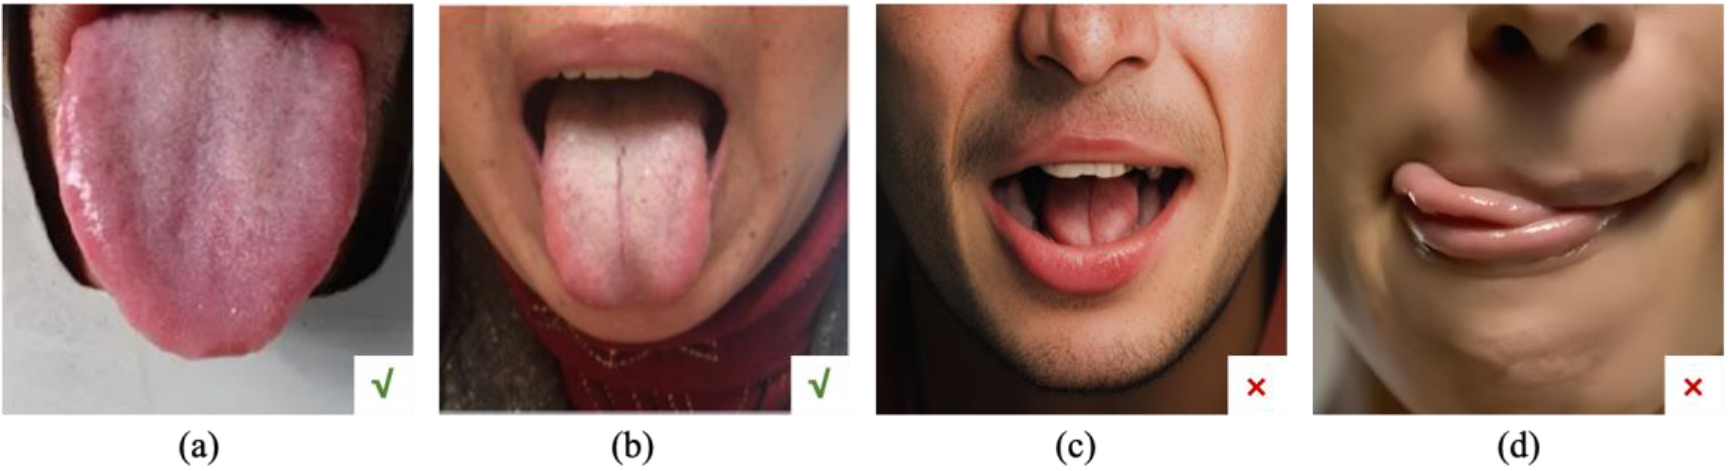 Common tongue images, where (a) and (b) are qualified tongue images, and the tongues in (c) and (d) are not extended, rendering them unqualified.